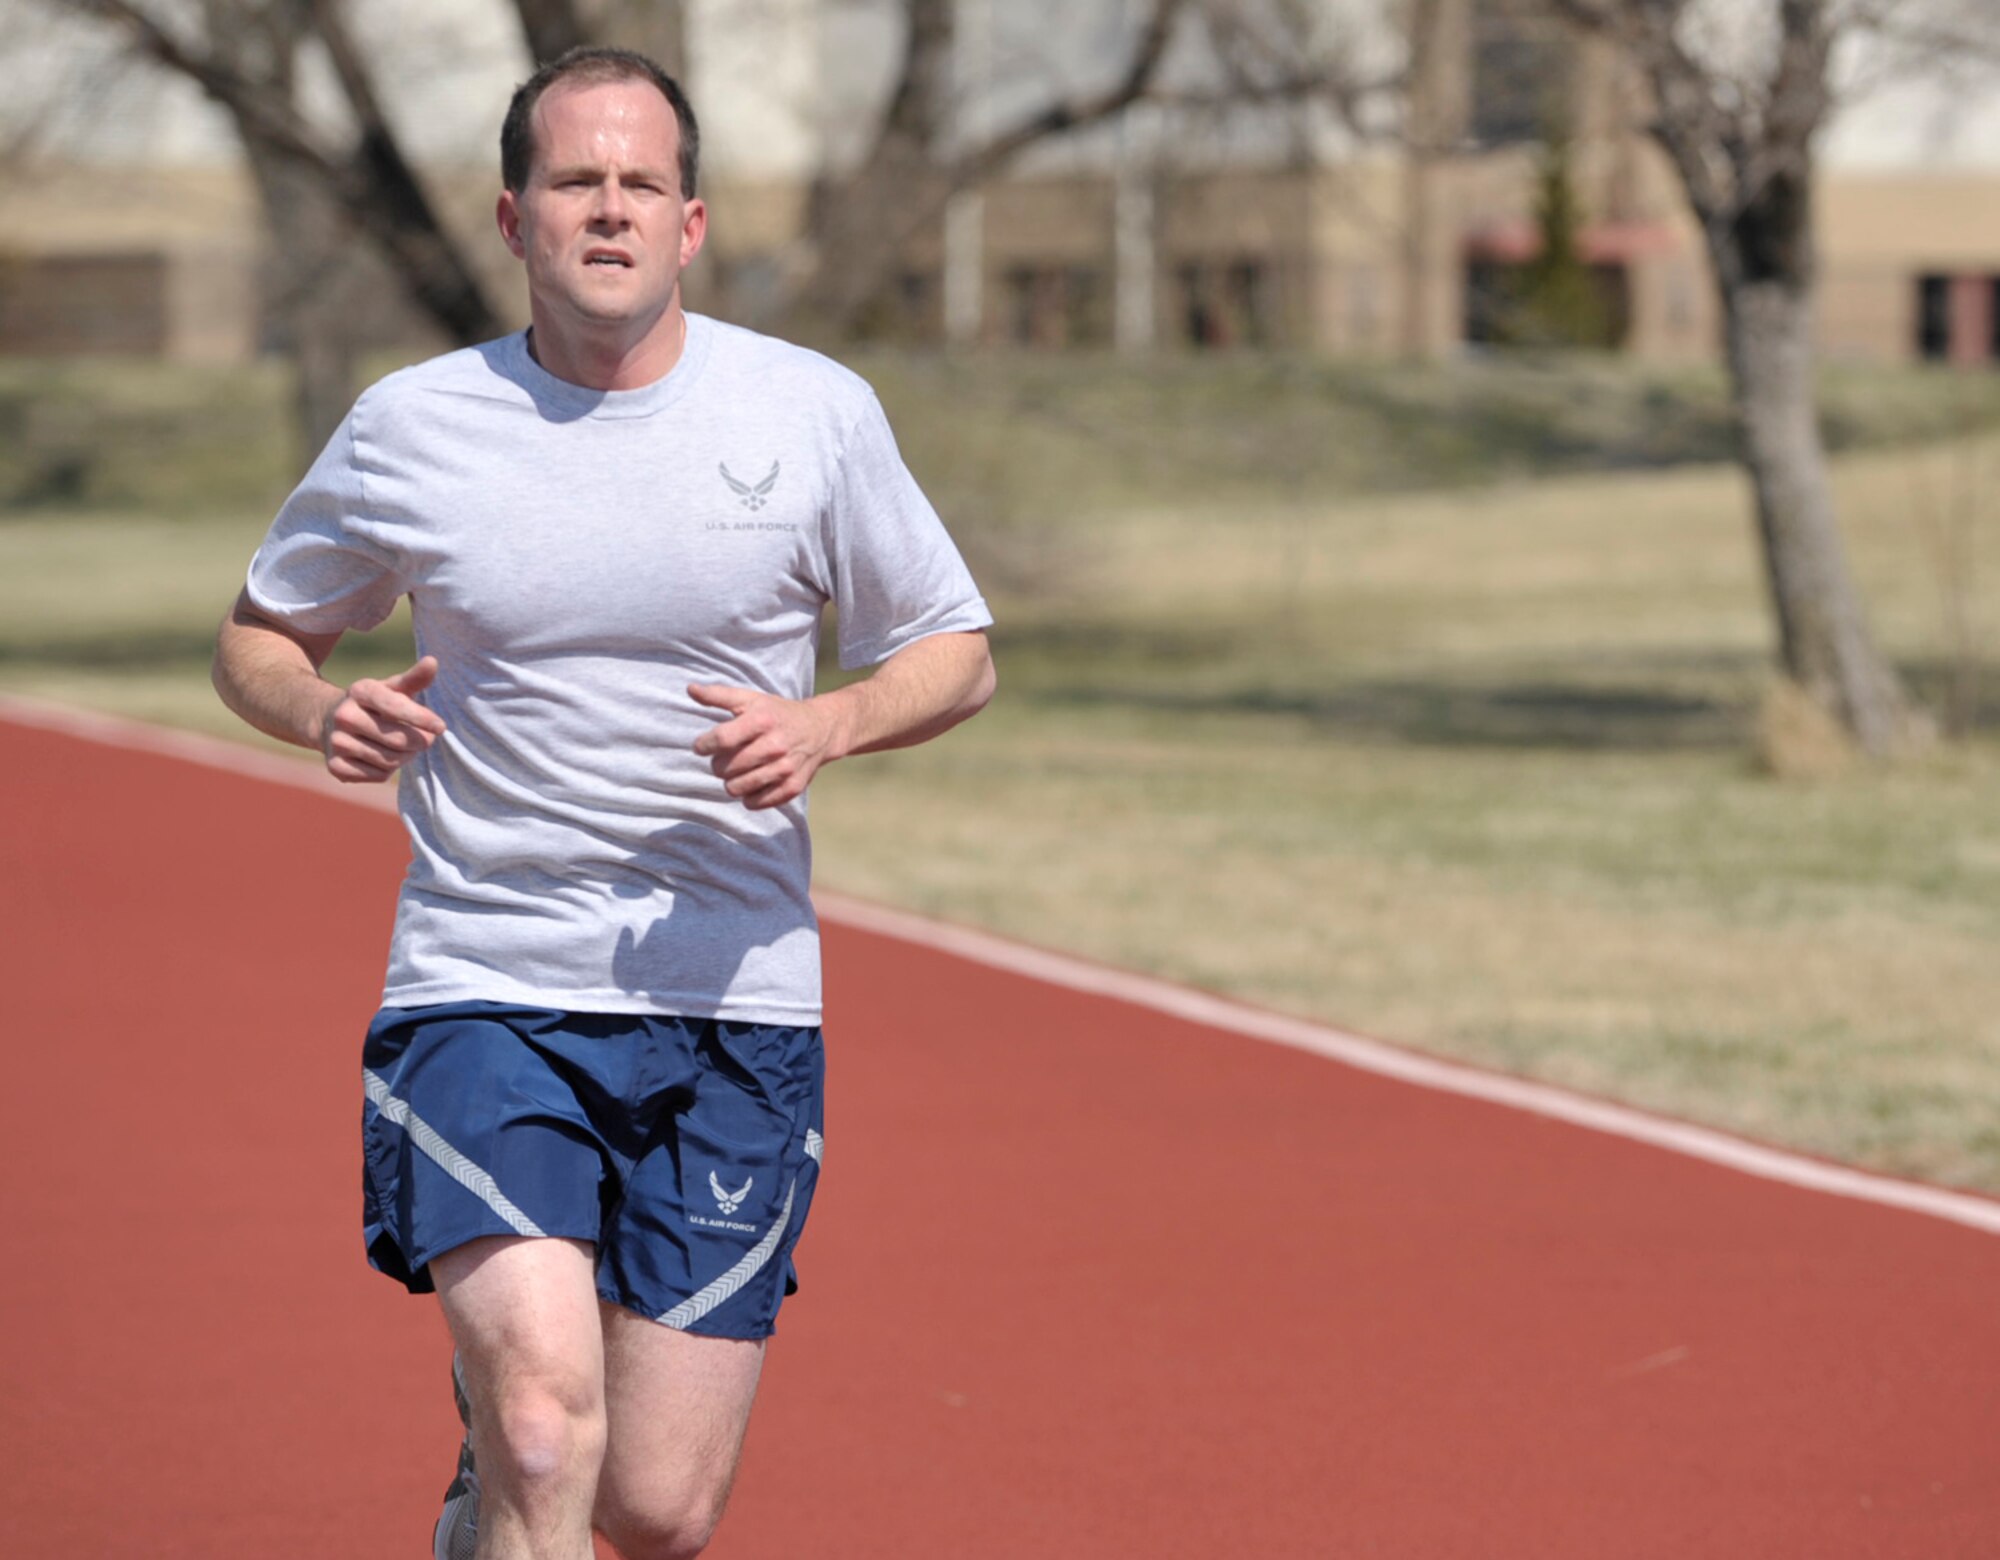 Capt. Layne Wroblewski nears the finish line of an outdoor track at McConnell Air Force Base, Kan., during the 931st Air Refueling Group's drill weekend in March. Group-wide fitness testing is scheduled to coincide with a five-day "Training Frenzy" in April. Captain Wroblewski is assigned to the 931st Equal Opportunity office and is one of the 931st ARG's "excellent" fitness performers. (U.S. Air Force photo/Tech. Sgt. Jason Schaap)